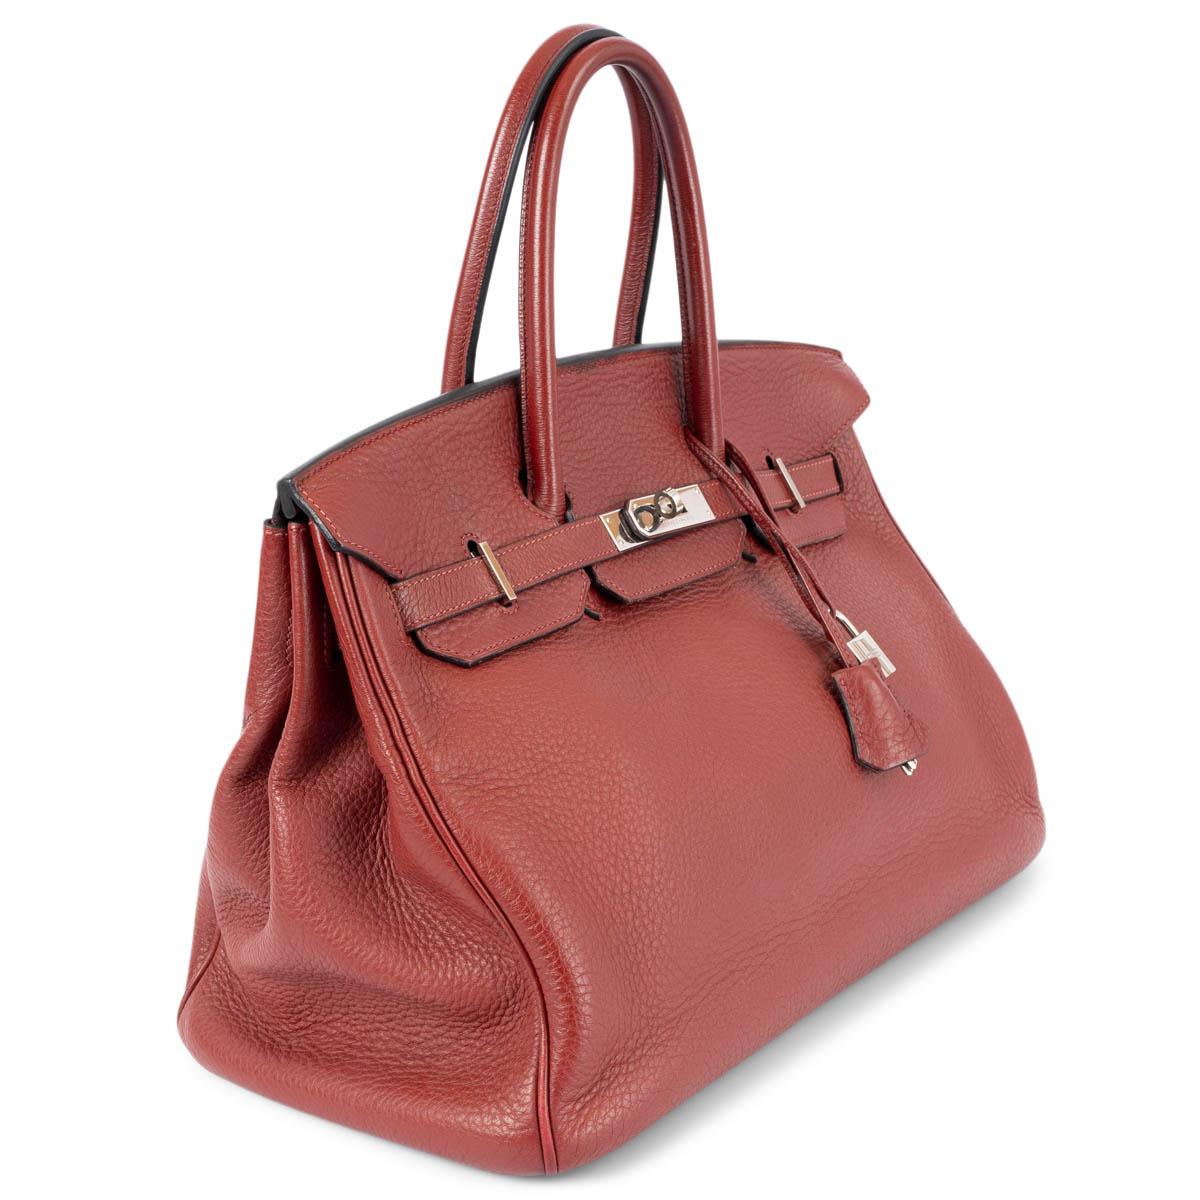 100% authentic Hermès Birkin 35 bag in Rouge H Taurillon Clemence leather. Lined in Chevre (goat skin) with an open pocket against the front and a zipper pocket against the back. Has been carried and shows soft wear to the corners and slight color